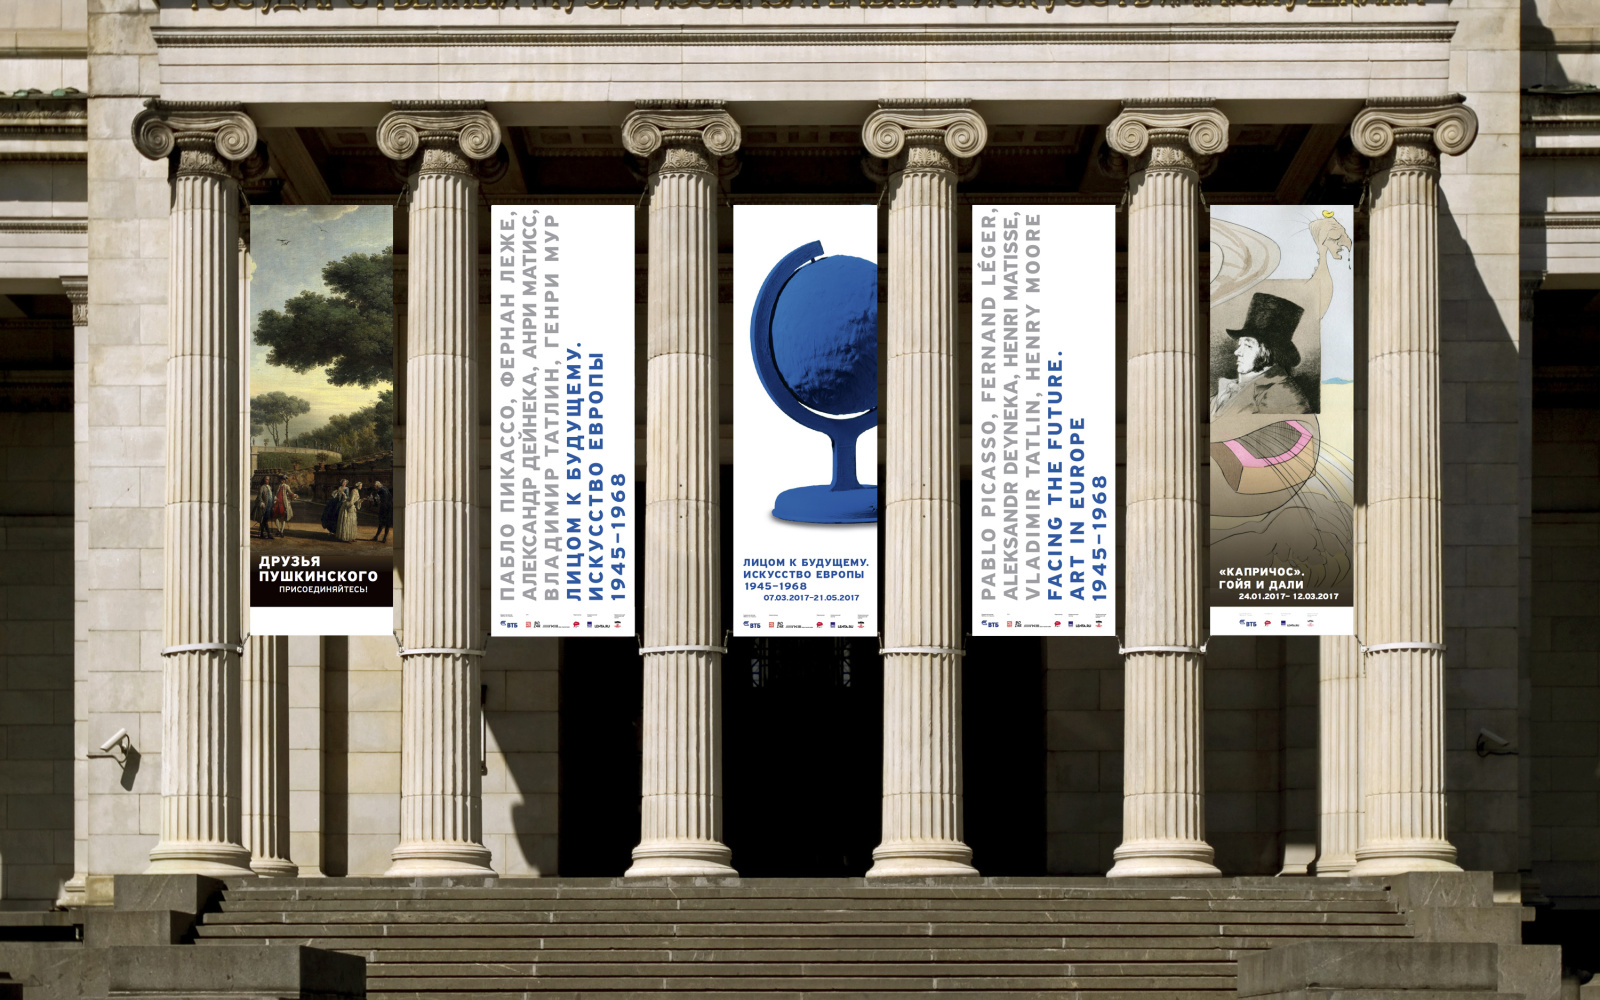  Exterior of the pillars of the Pushkin Museum in Moscow, between which banners are suspended